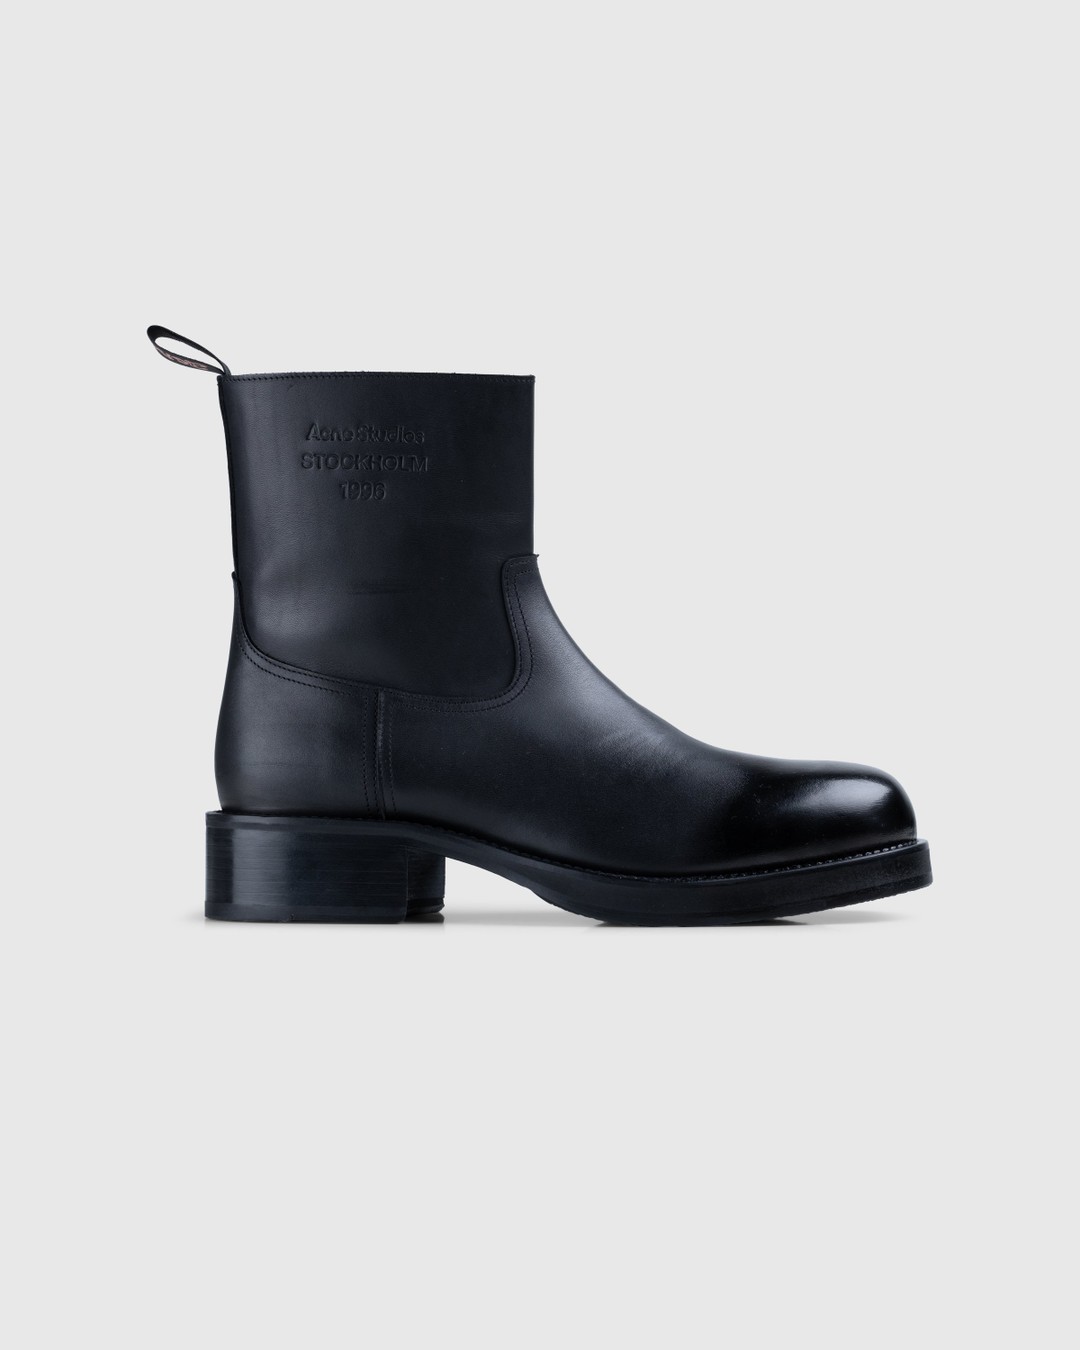 Acne Studios – Sprayed Leather Ankle Boots Black - Boots - Black - Image 1